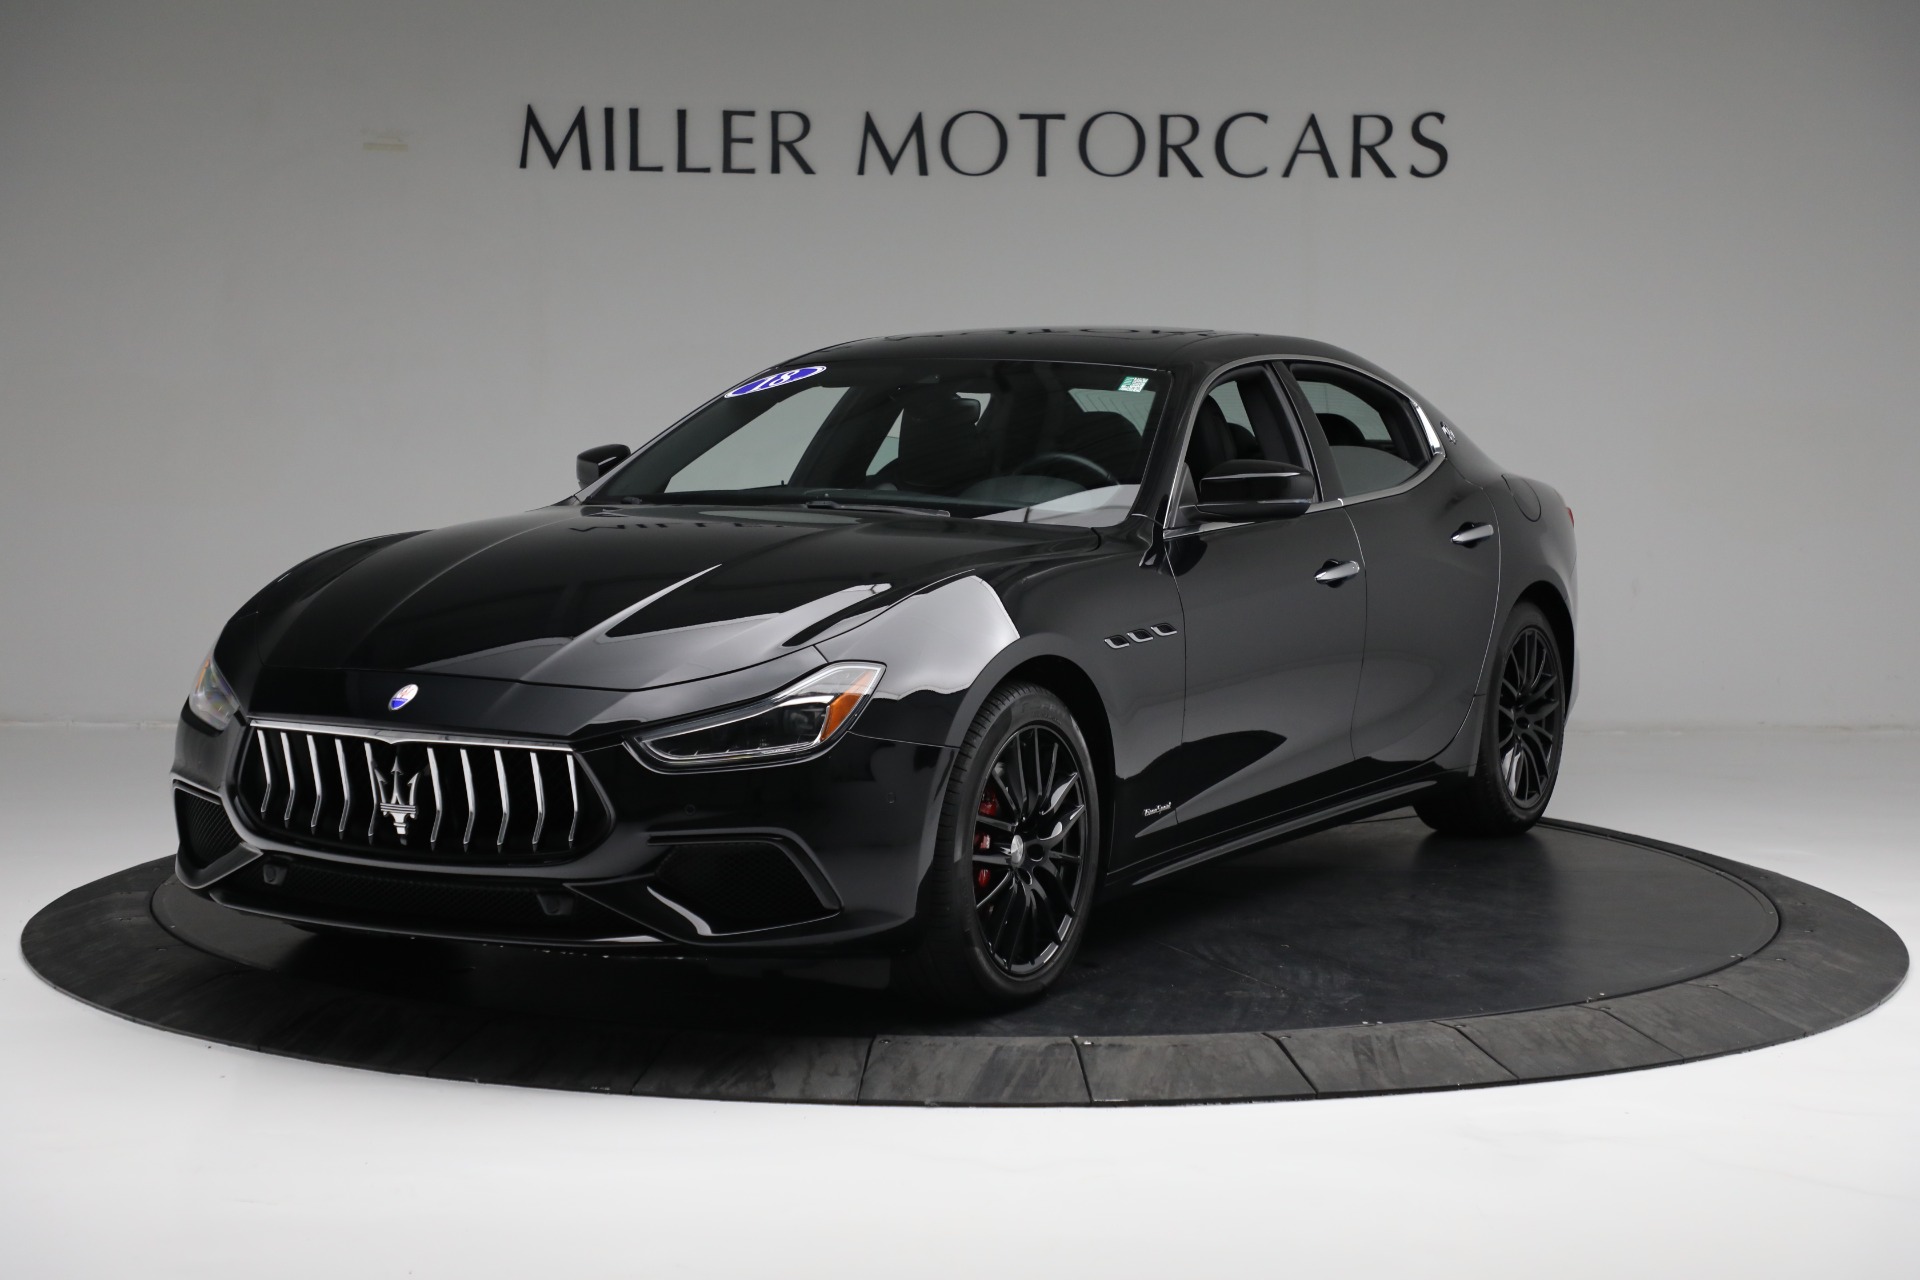 Used 2018 Maserati Ghibli S Q4 Gransport for sale $58,900 at Pagani of Greenwich in Greenwich CT 06830 1